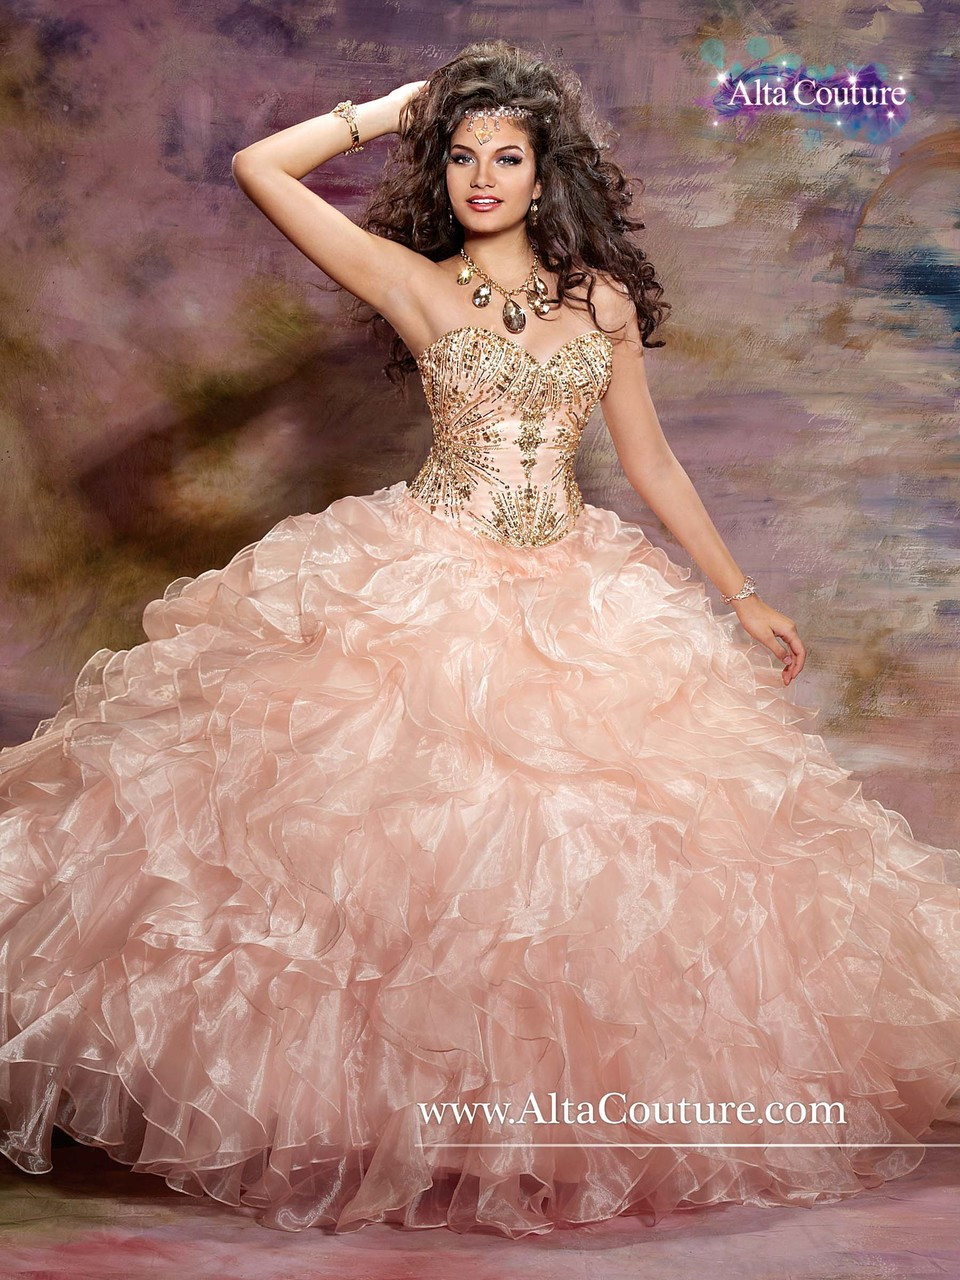 Discount Alta Couture by Mary's Quinceanera Dress 4T116 on SALE